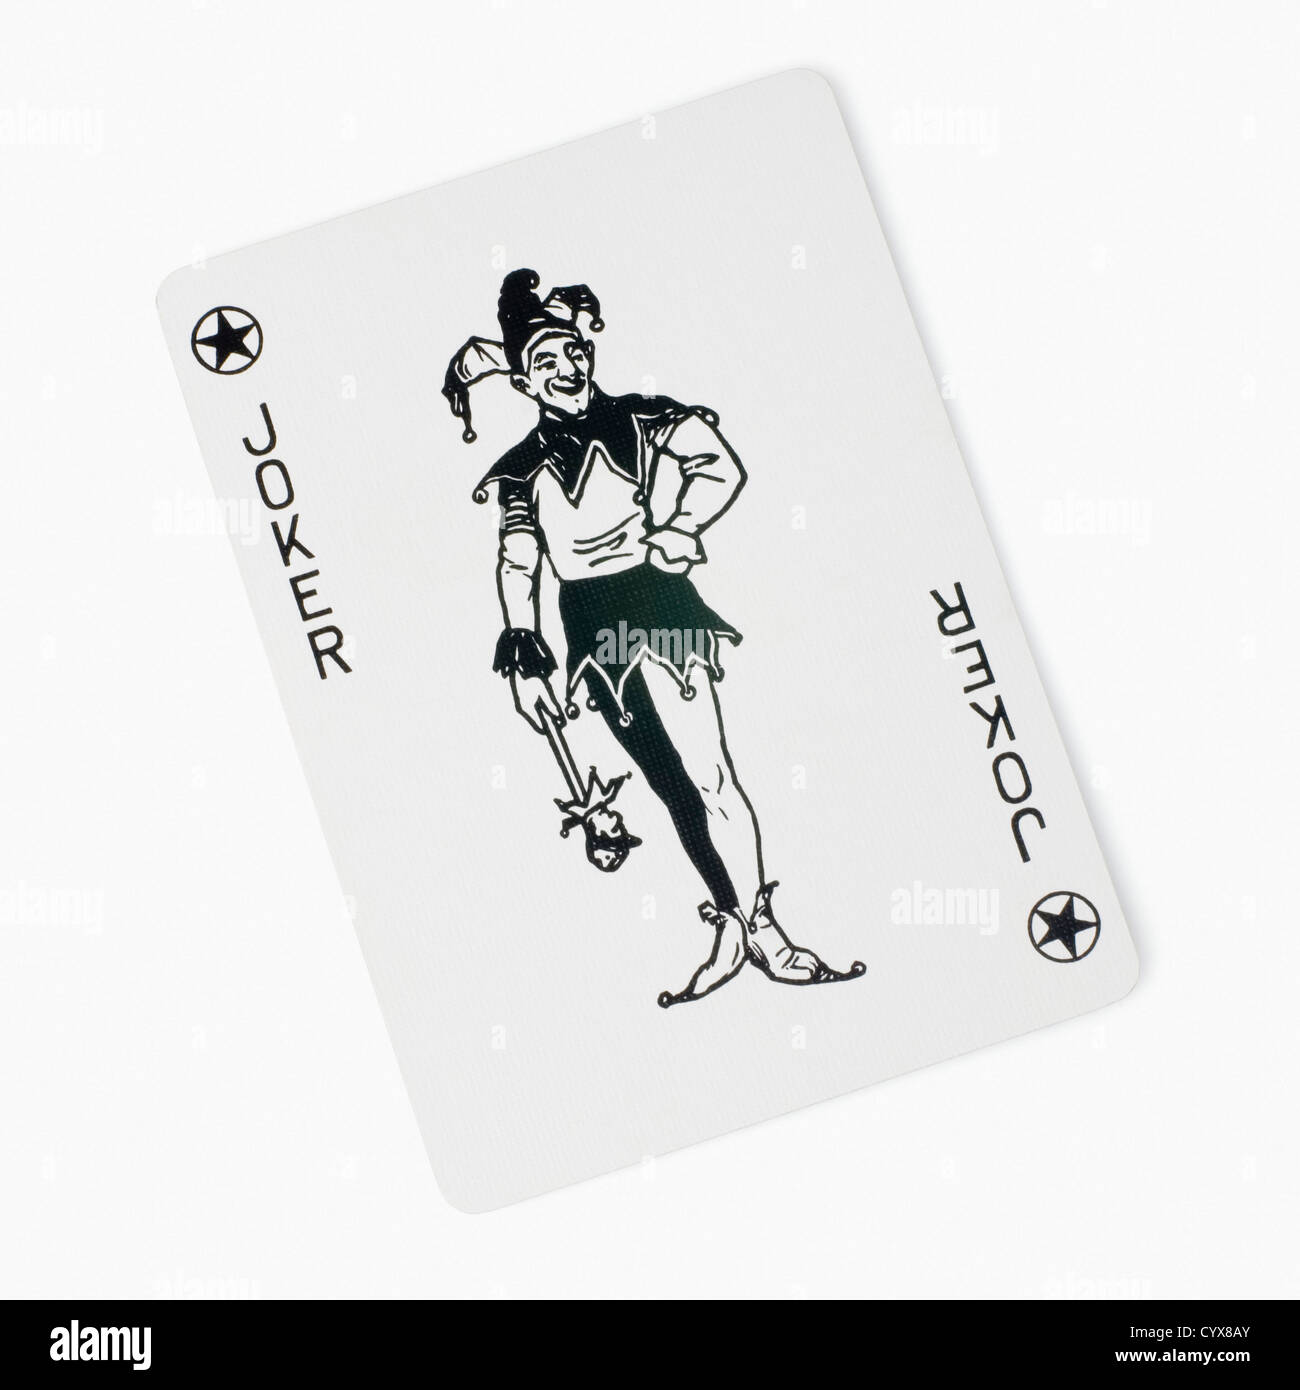 Joker on a playing card Stock Photo